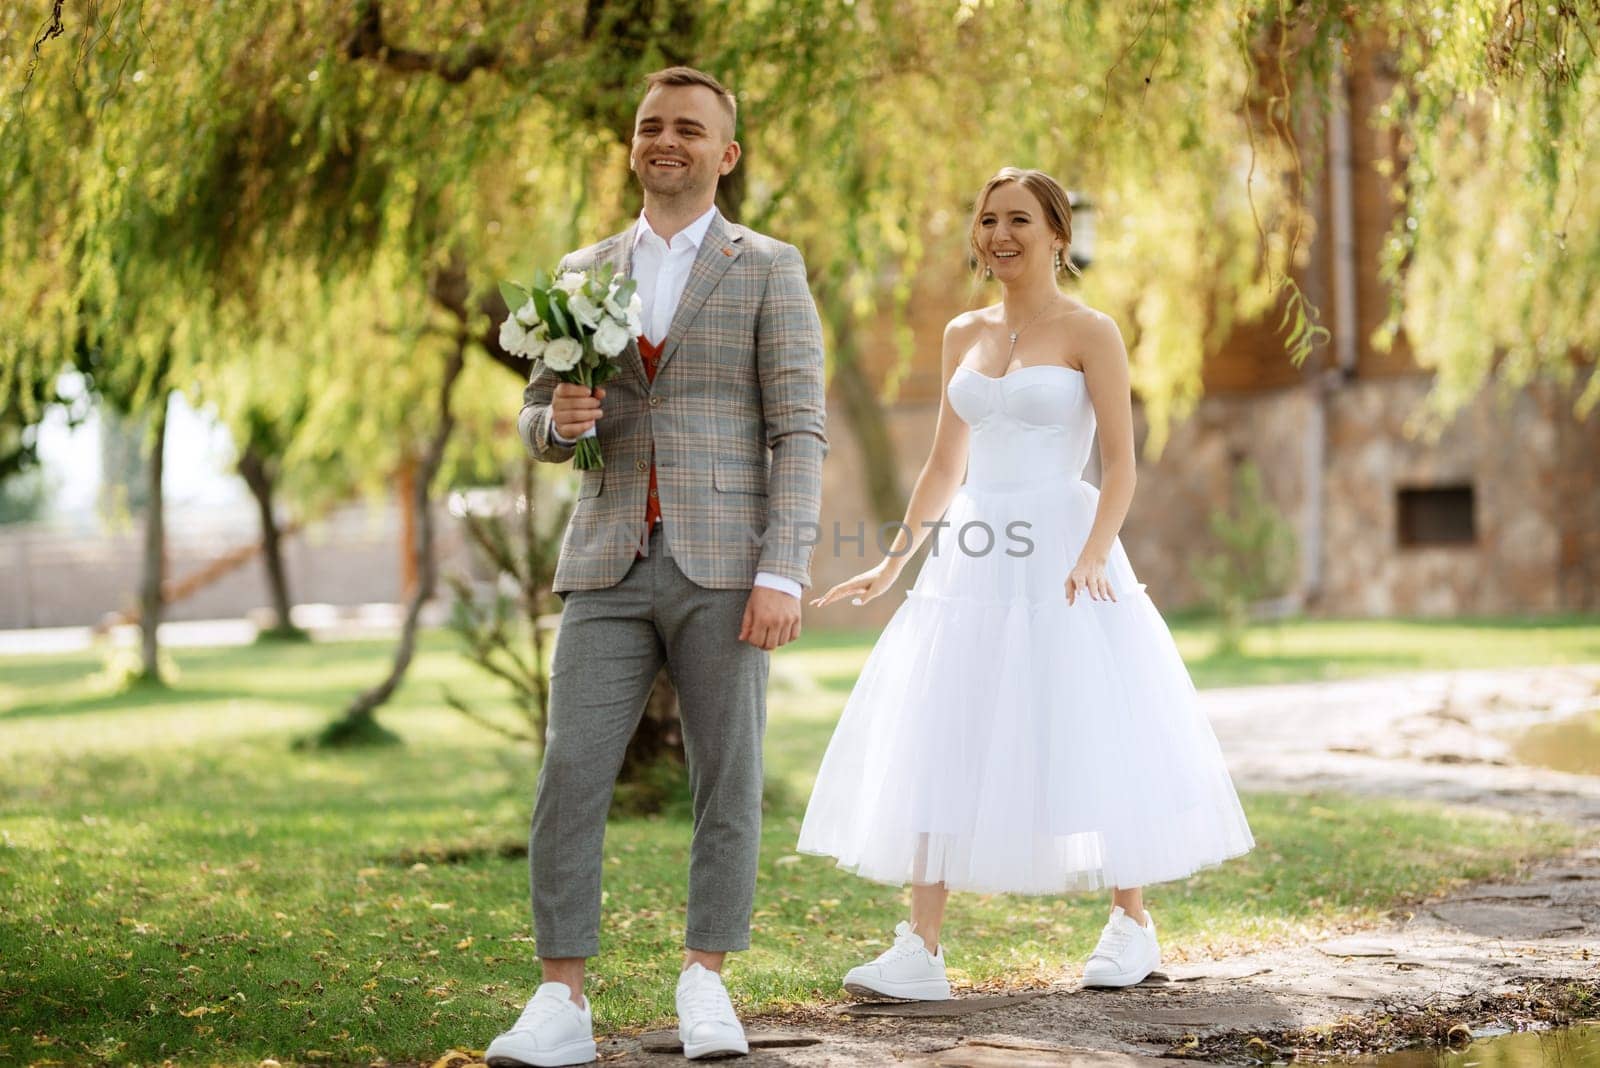 the first meeting of the bride and groom in wedding outfits in the park